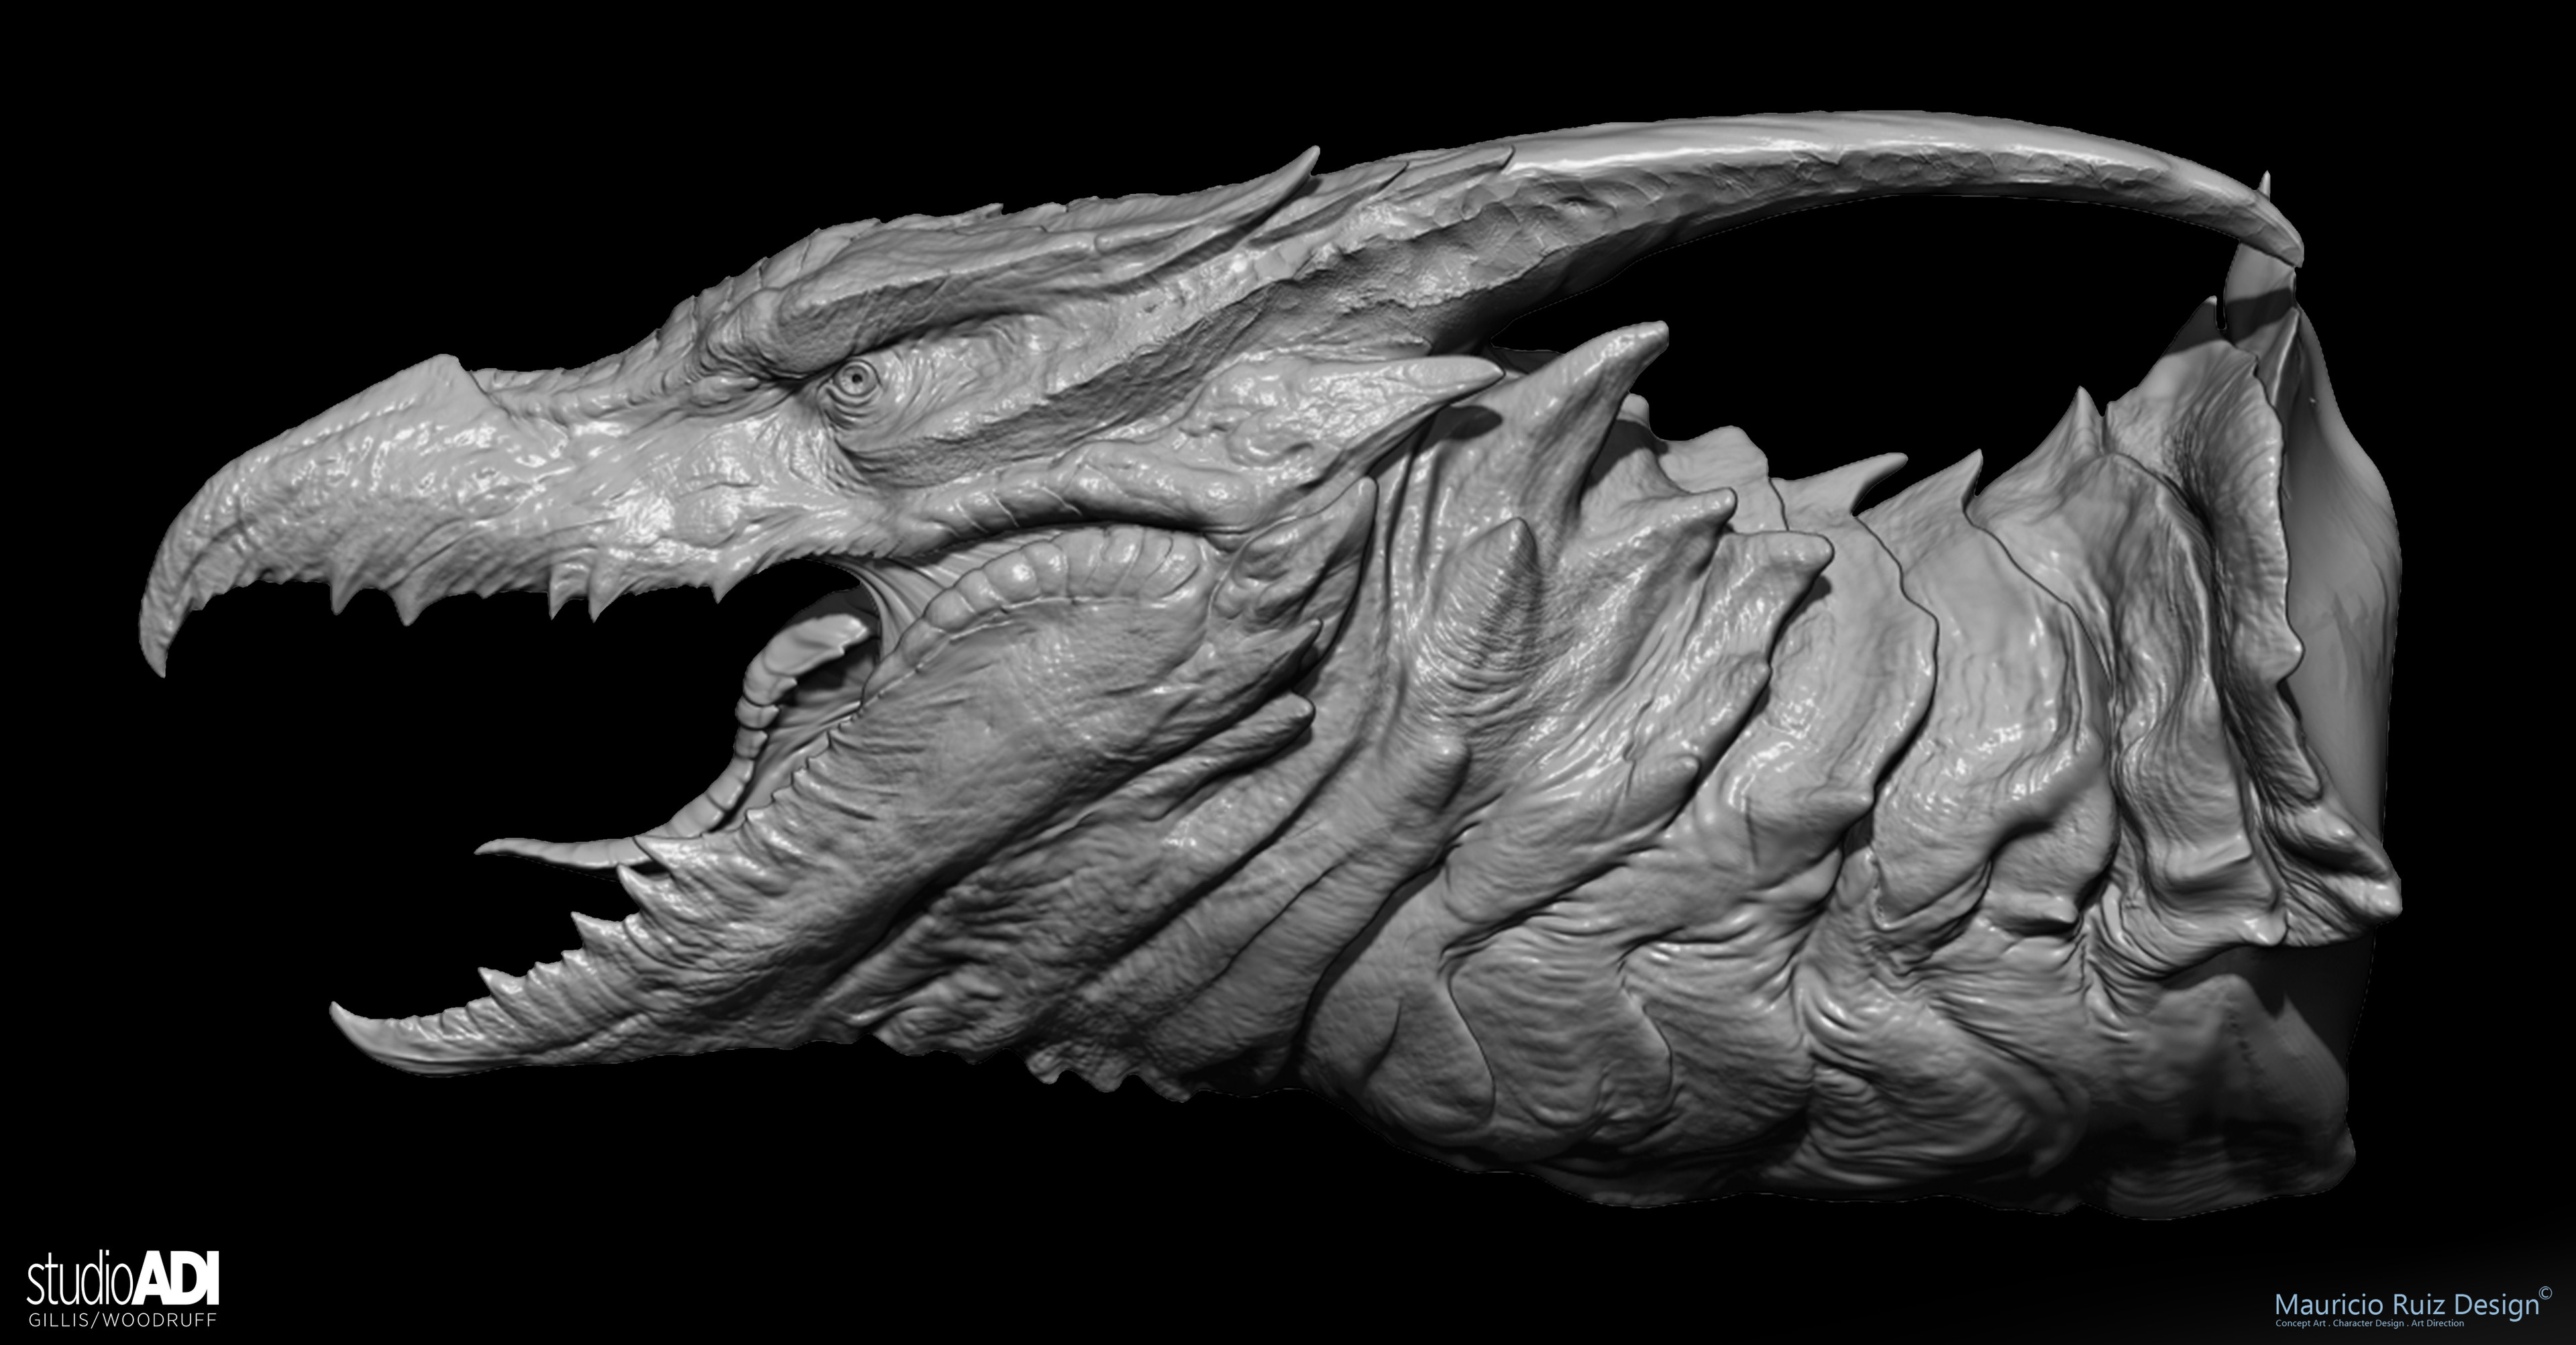 The following images show the Final sculpt for Rodan's head without color.